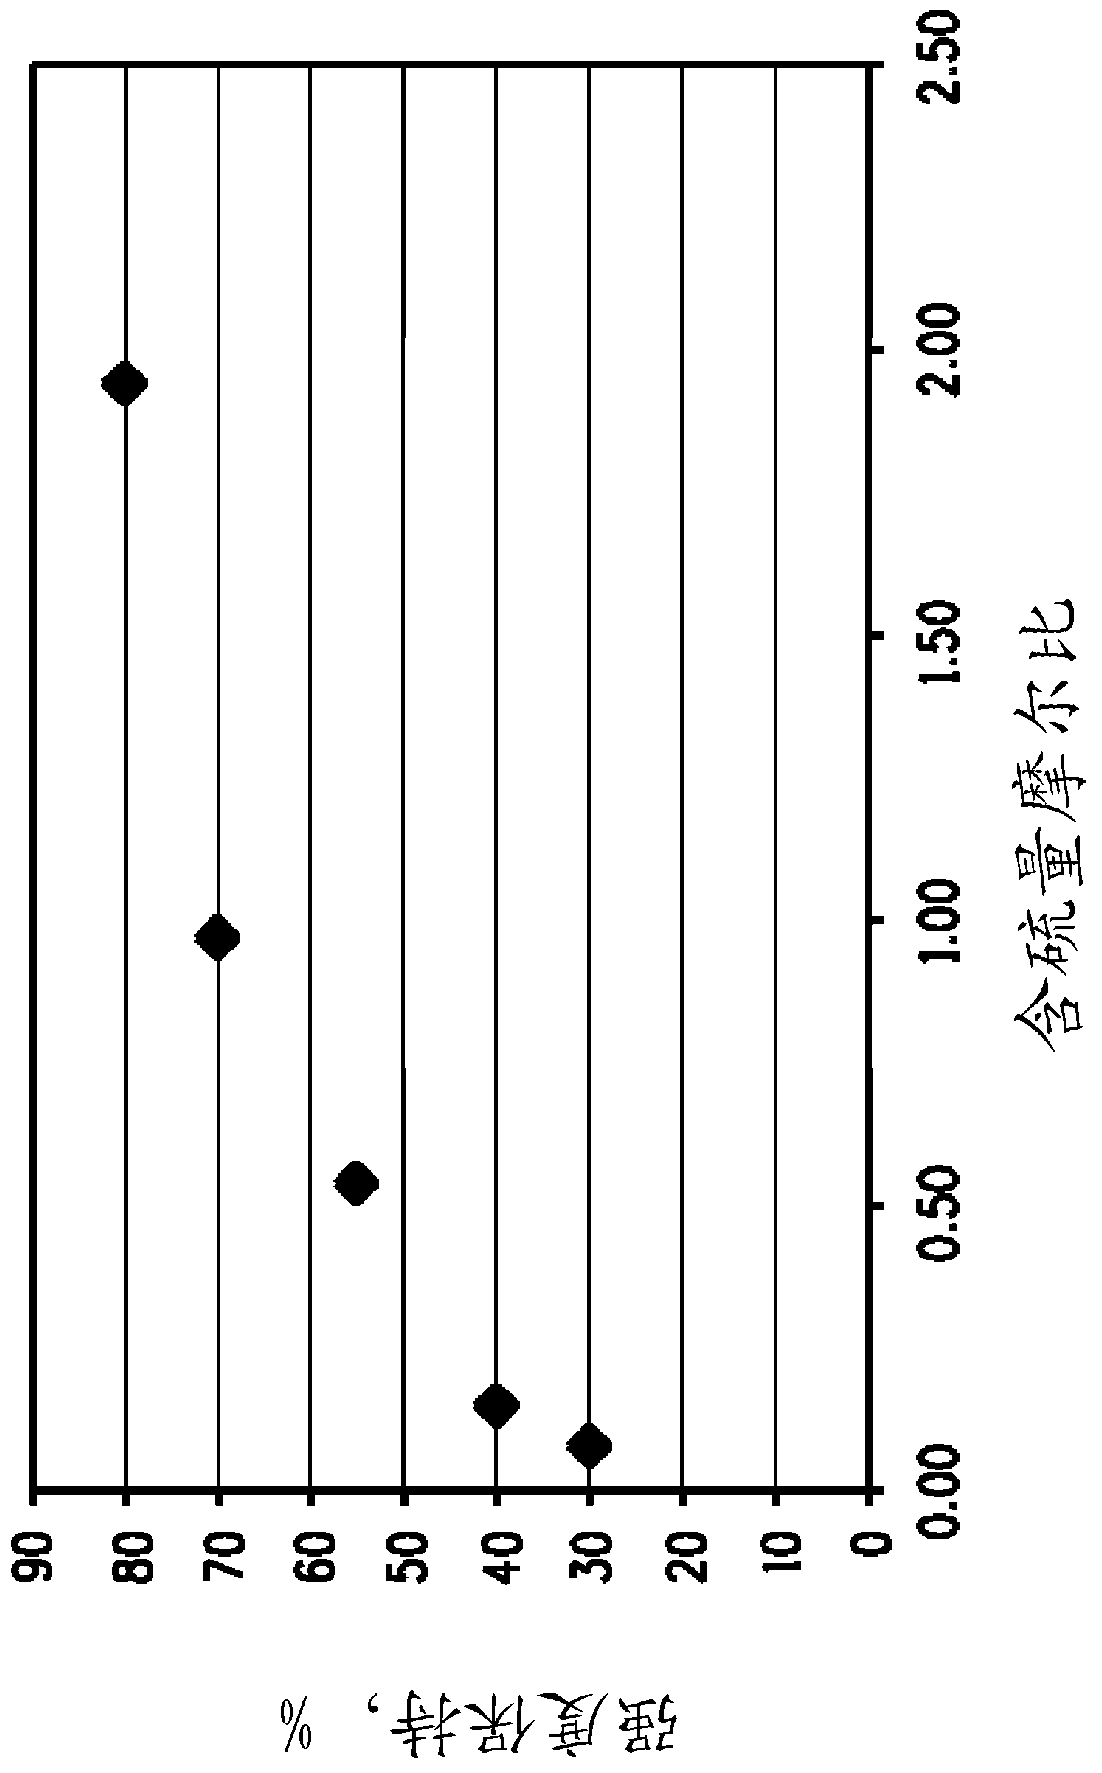 Copolymer fibers and processes for making same